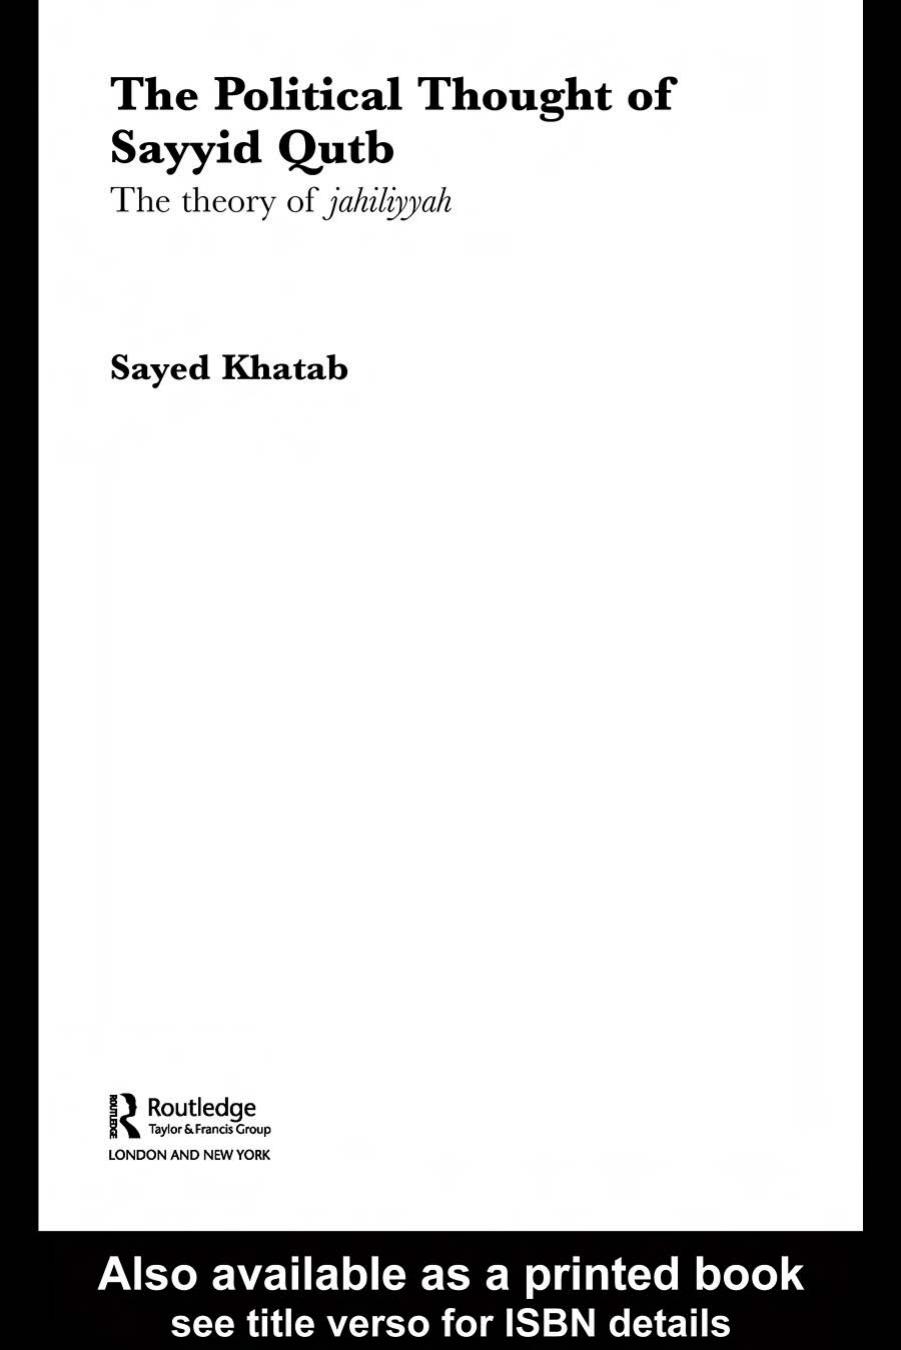 The political thought of Sayyid Qutb: the theory of jahiliyyah by Sayed Khatab